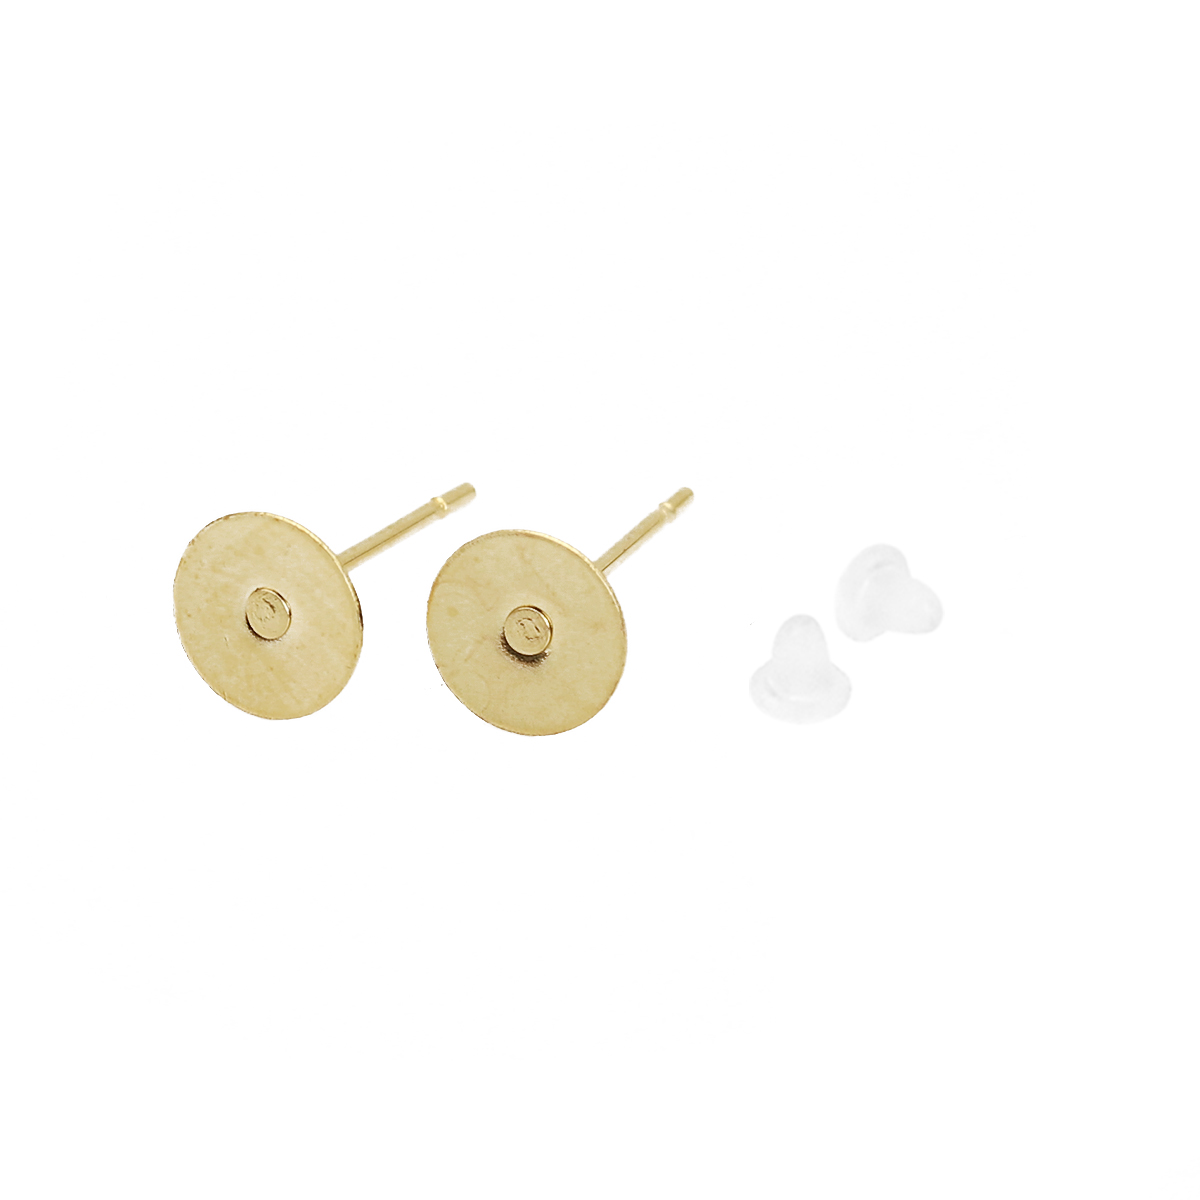 Picture of 304 Stainless Steel Glue-On Ear Post Stud Earrings Round Gold Plated (Fits 6mm Dia.) 6mm( 2/8") Dia., Post/ Wire Size: (21 gauge), 30 PCs